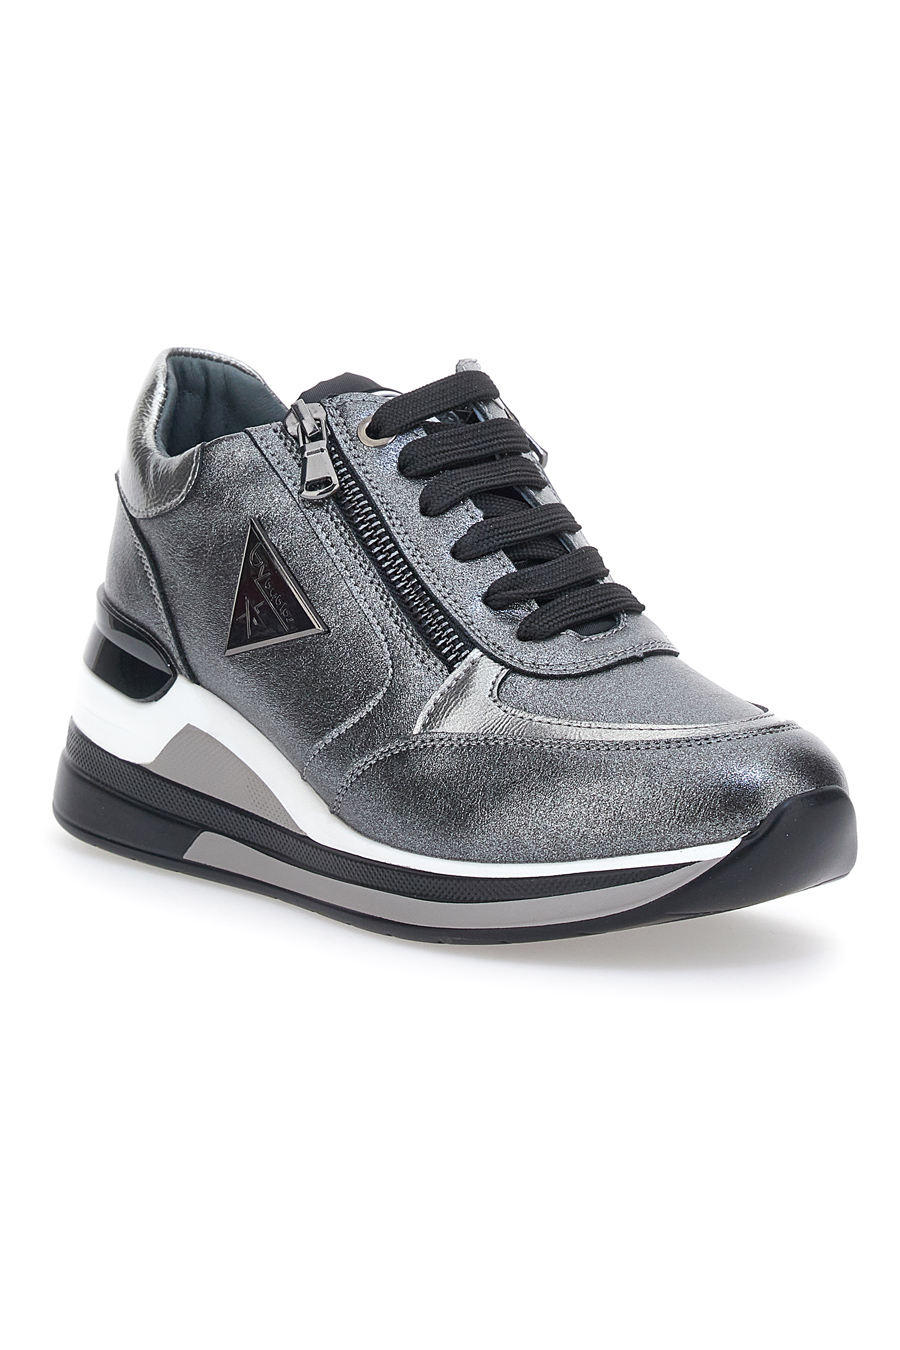 BY BYBLOS 420 SNEAKERS argento per donna